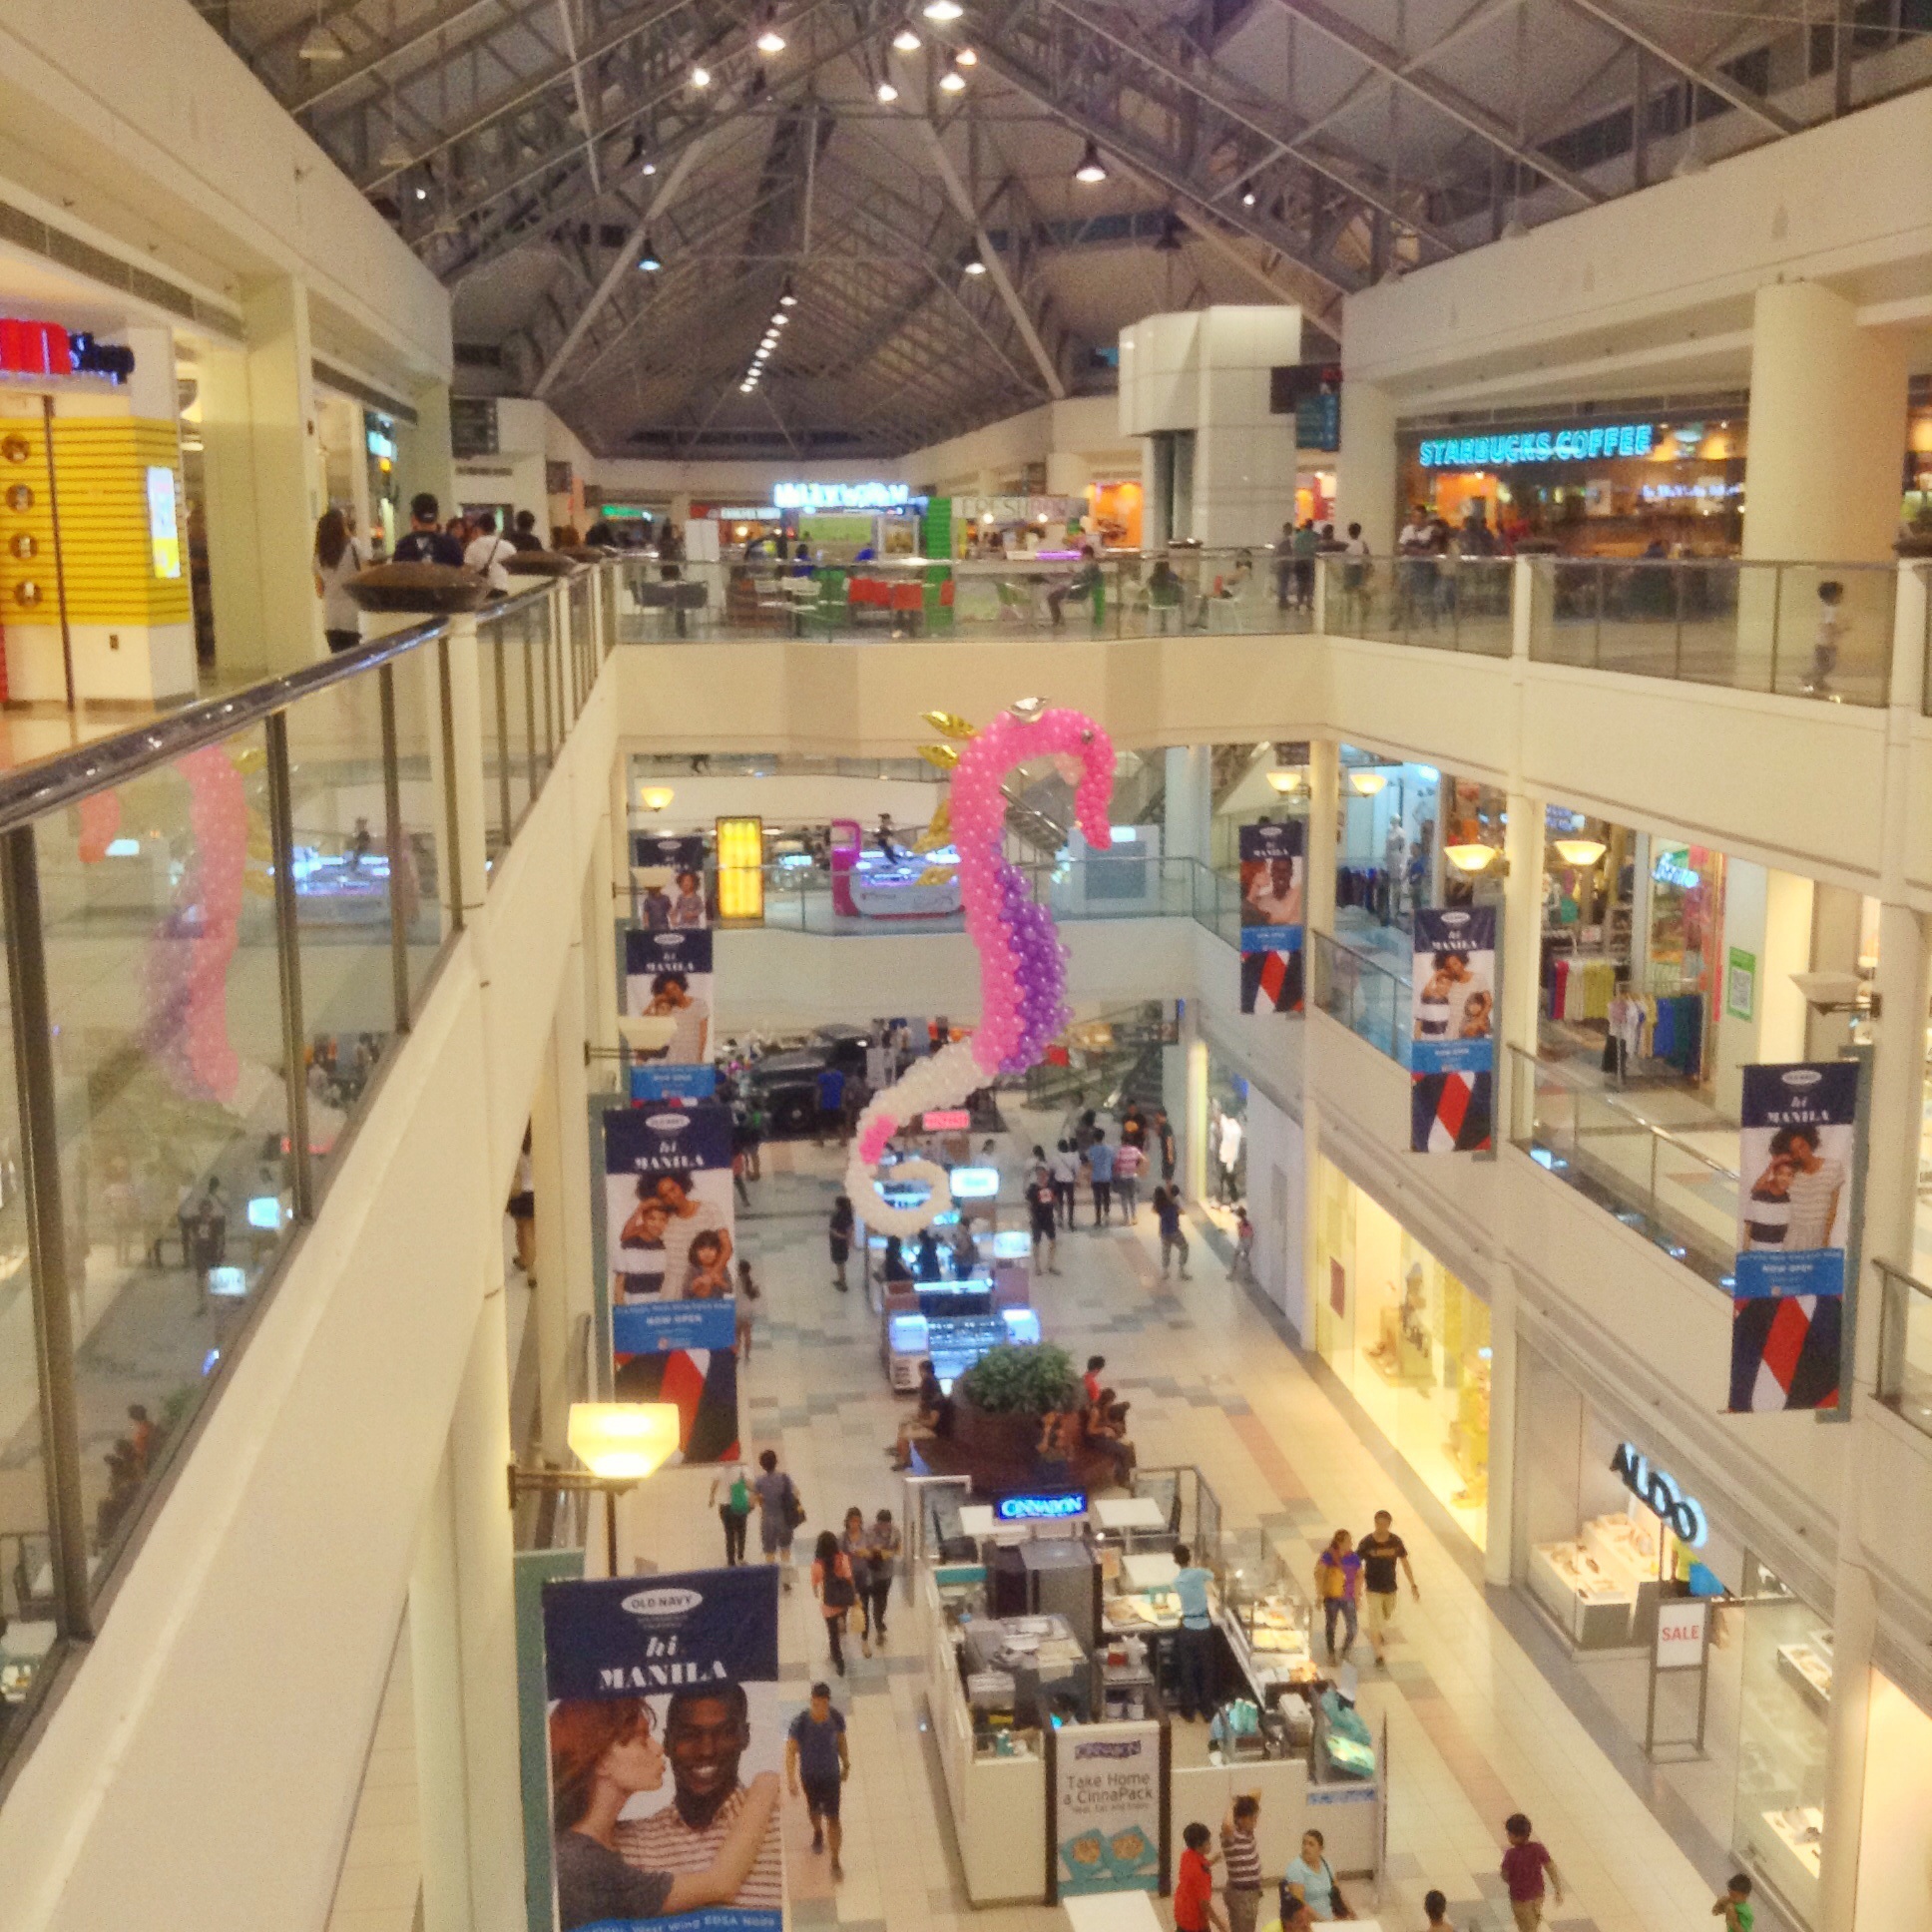 Robinsons Galleria: Food, Trucks, and Shoes on a lazy Sunday